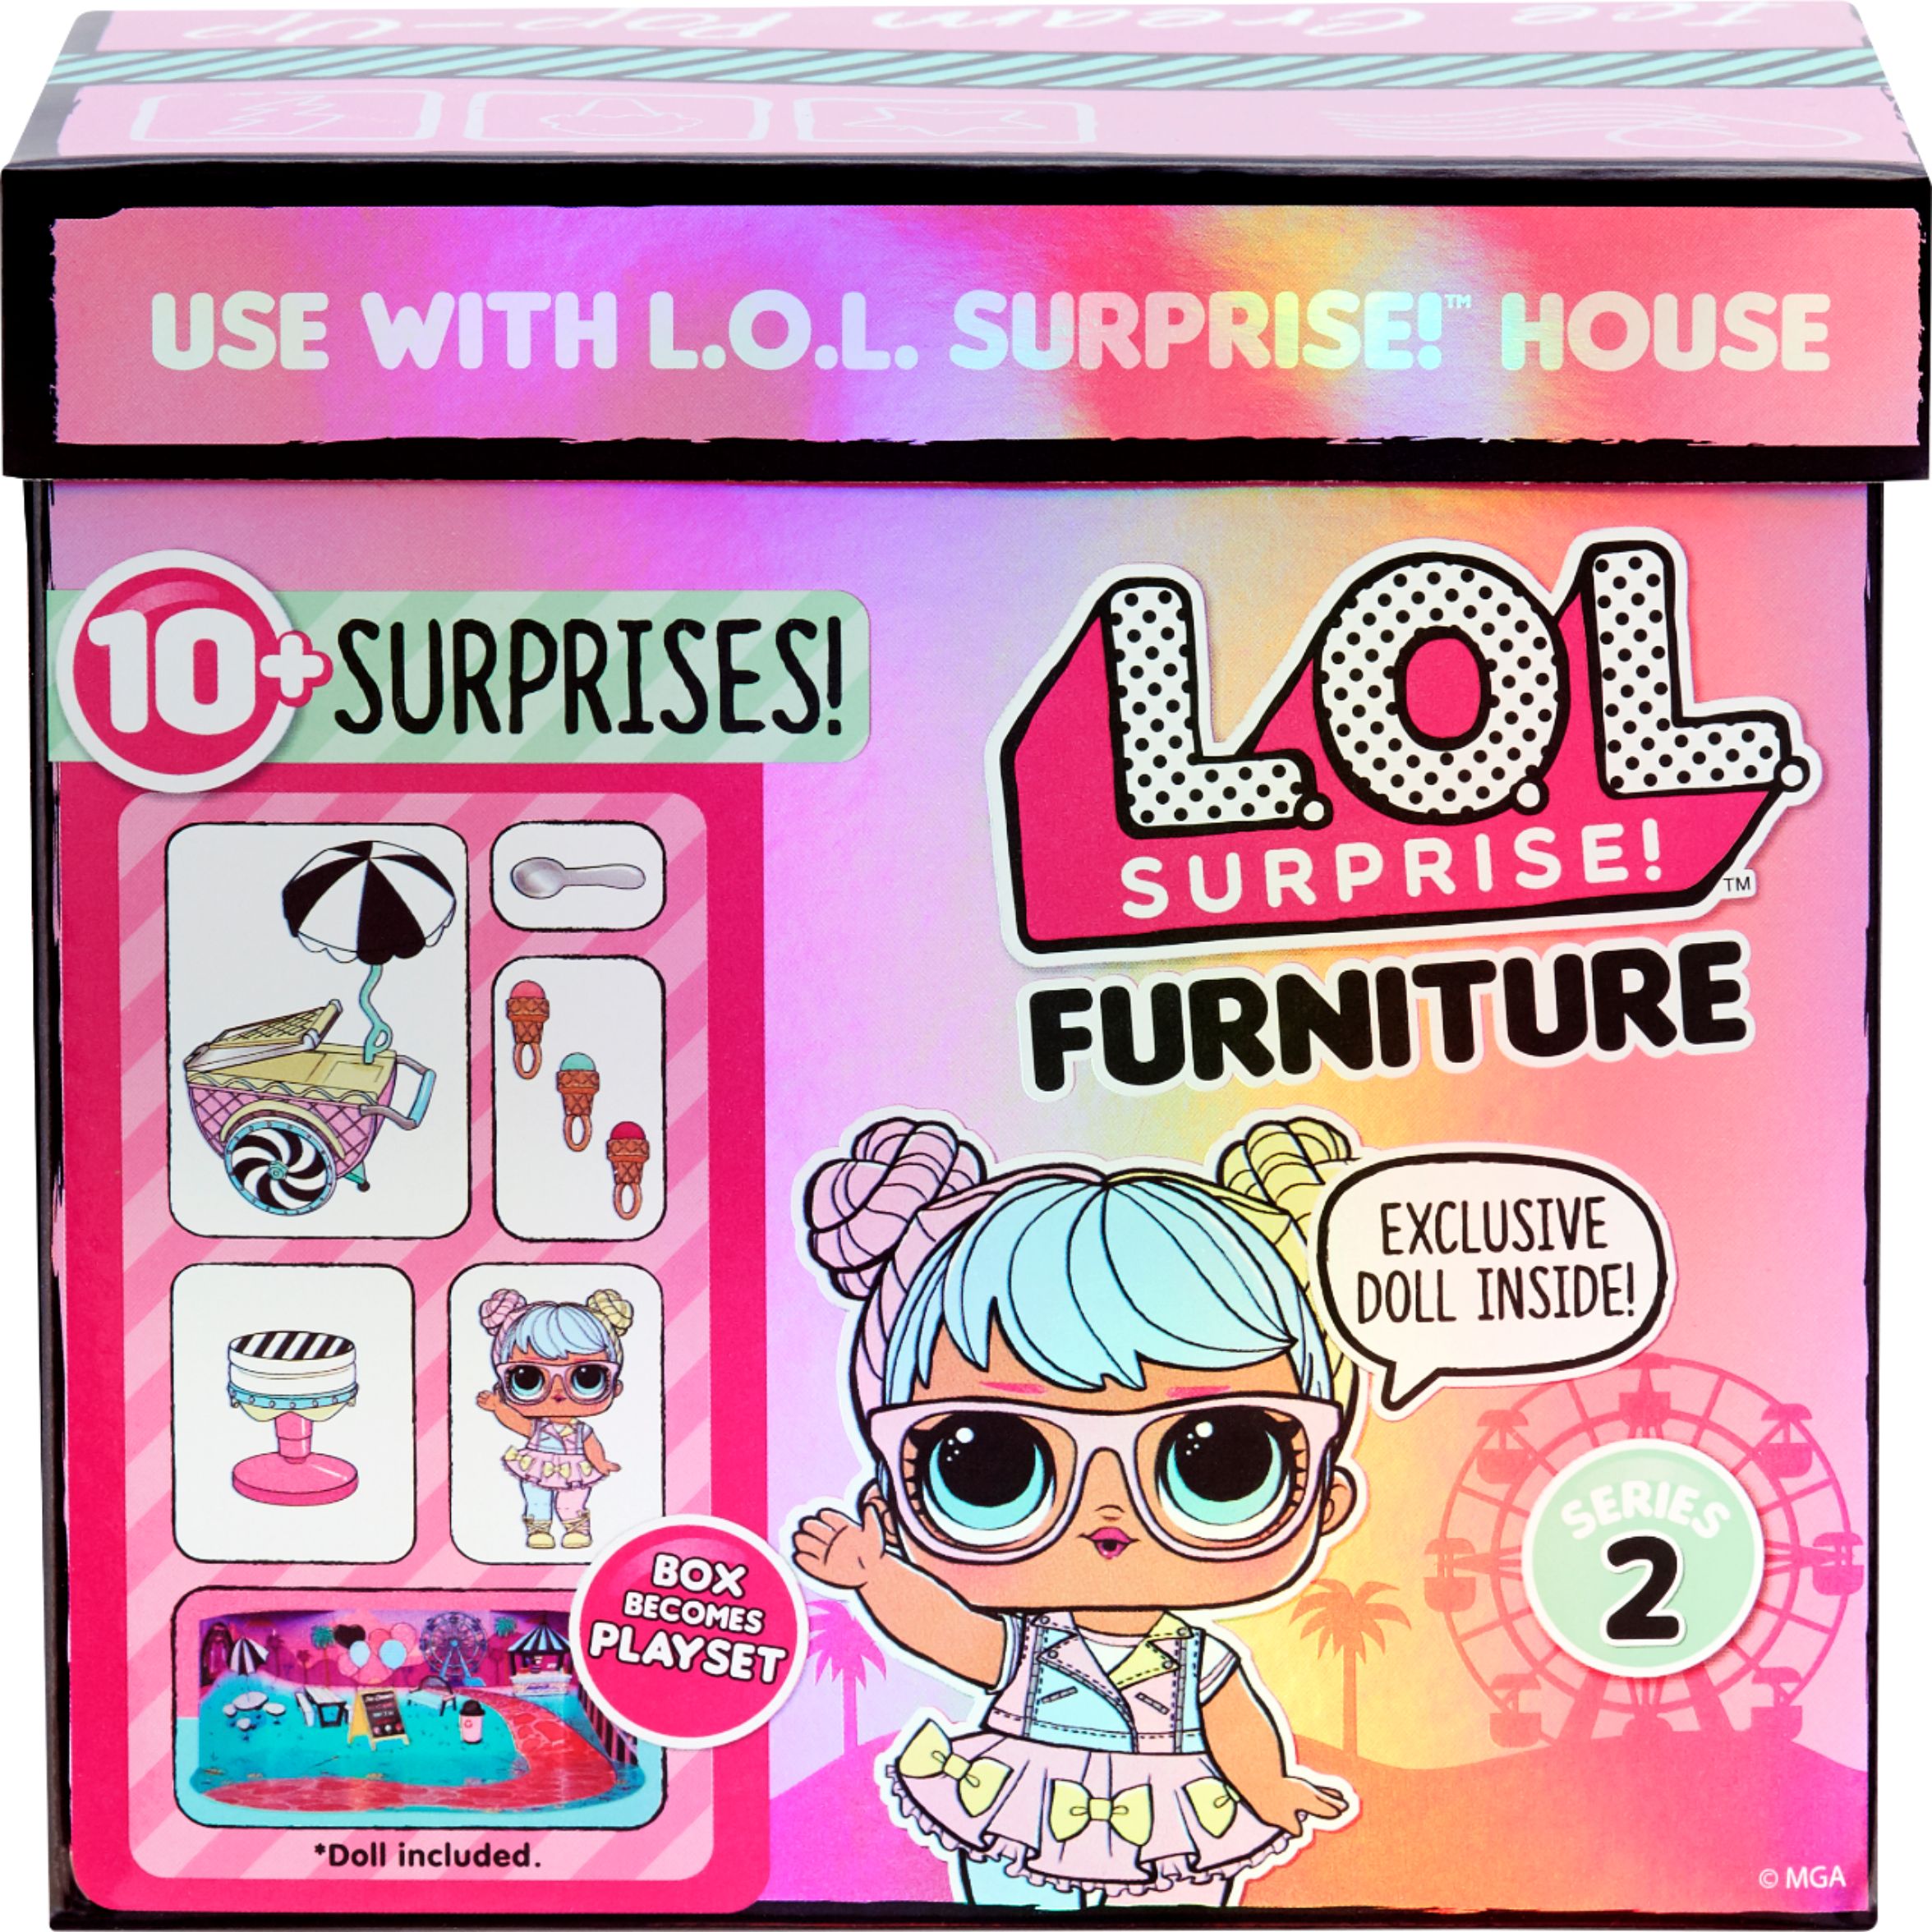 L.O.L Surprise Style 3 Furniture with Doll